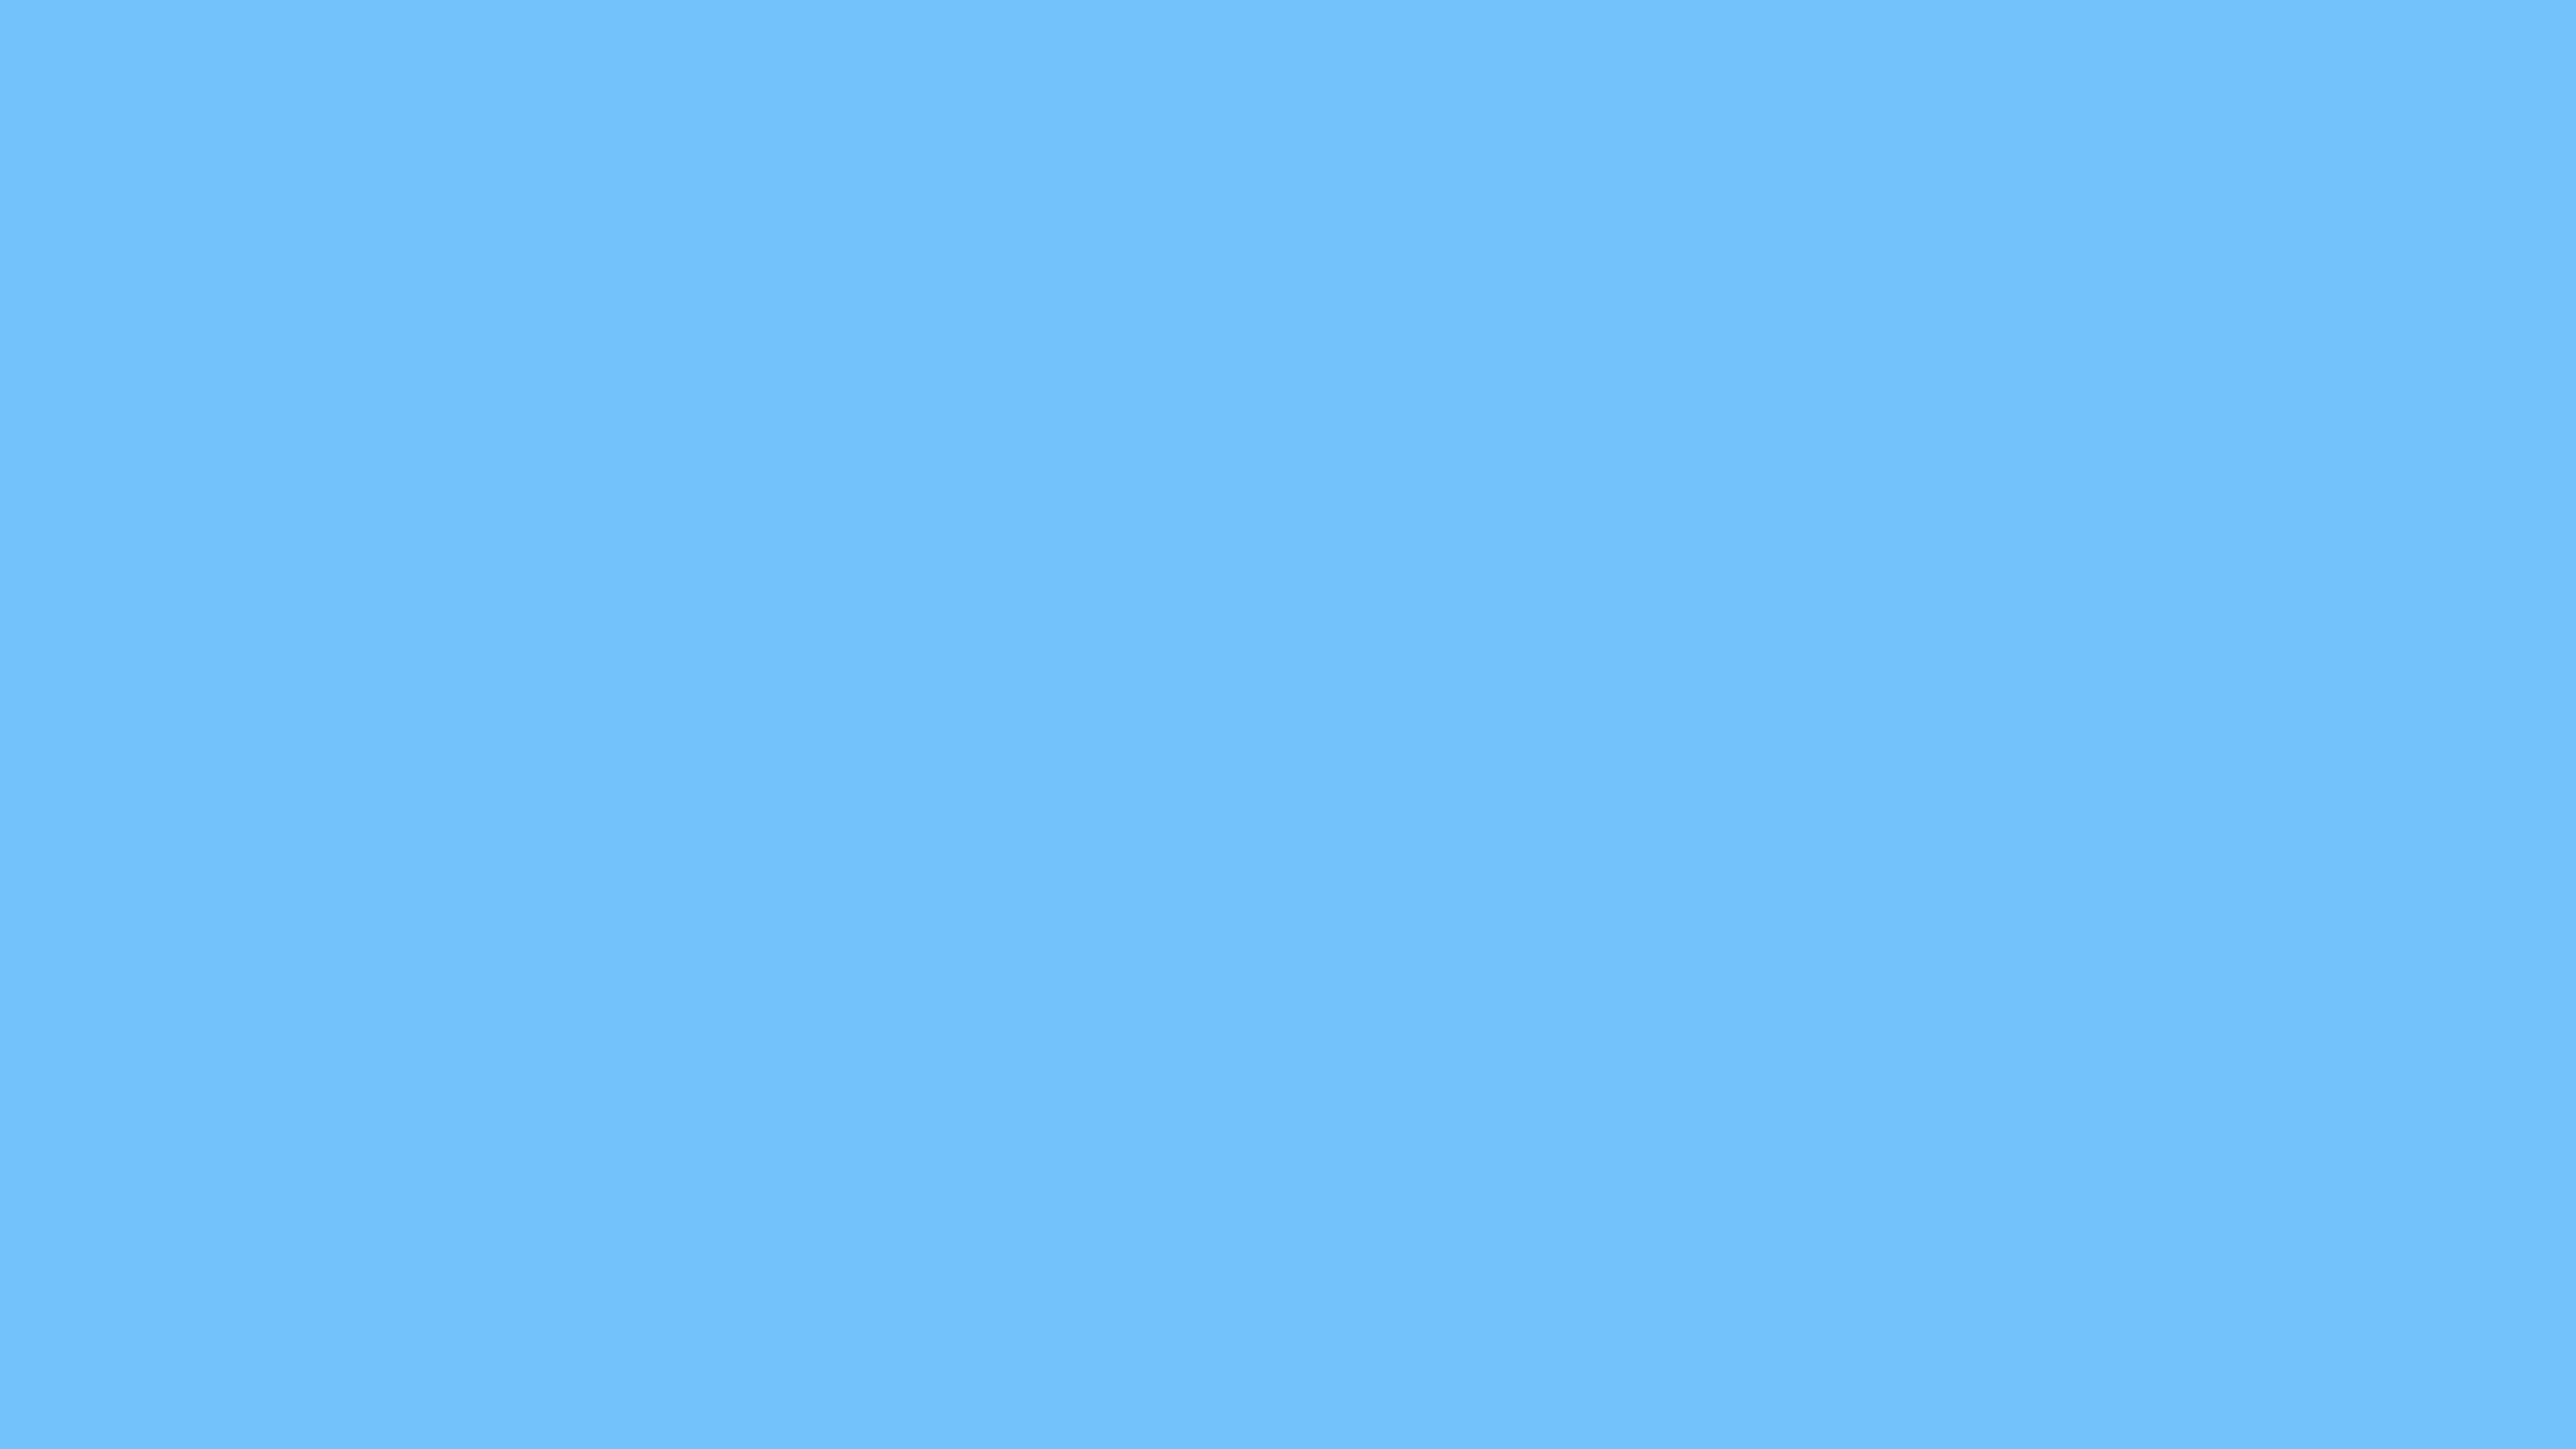 4096x2304 Maya Blue Solid Color Background